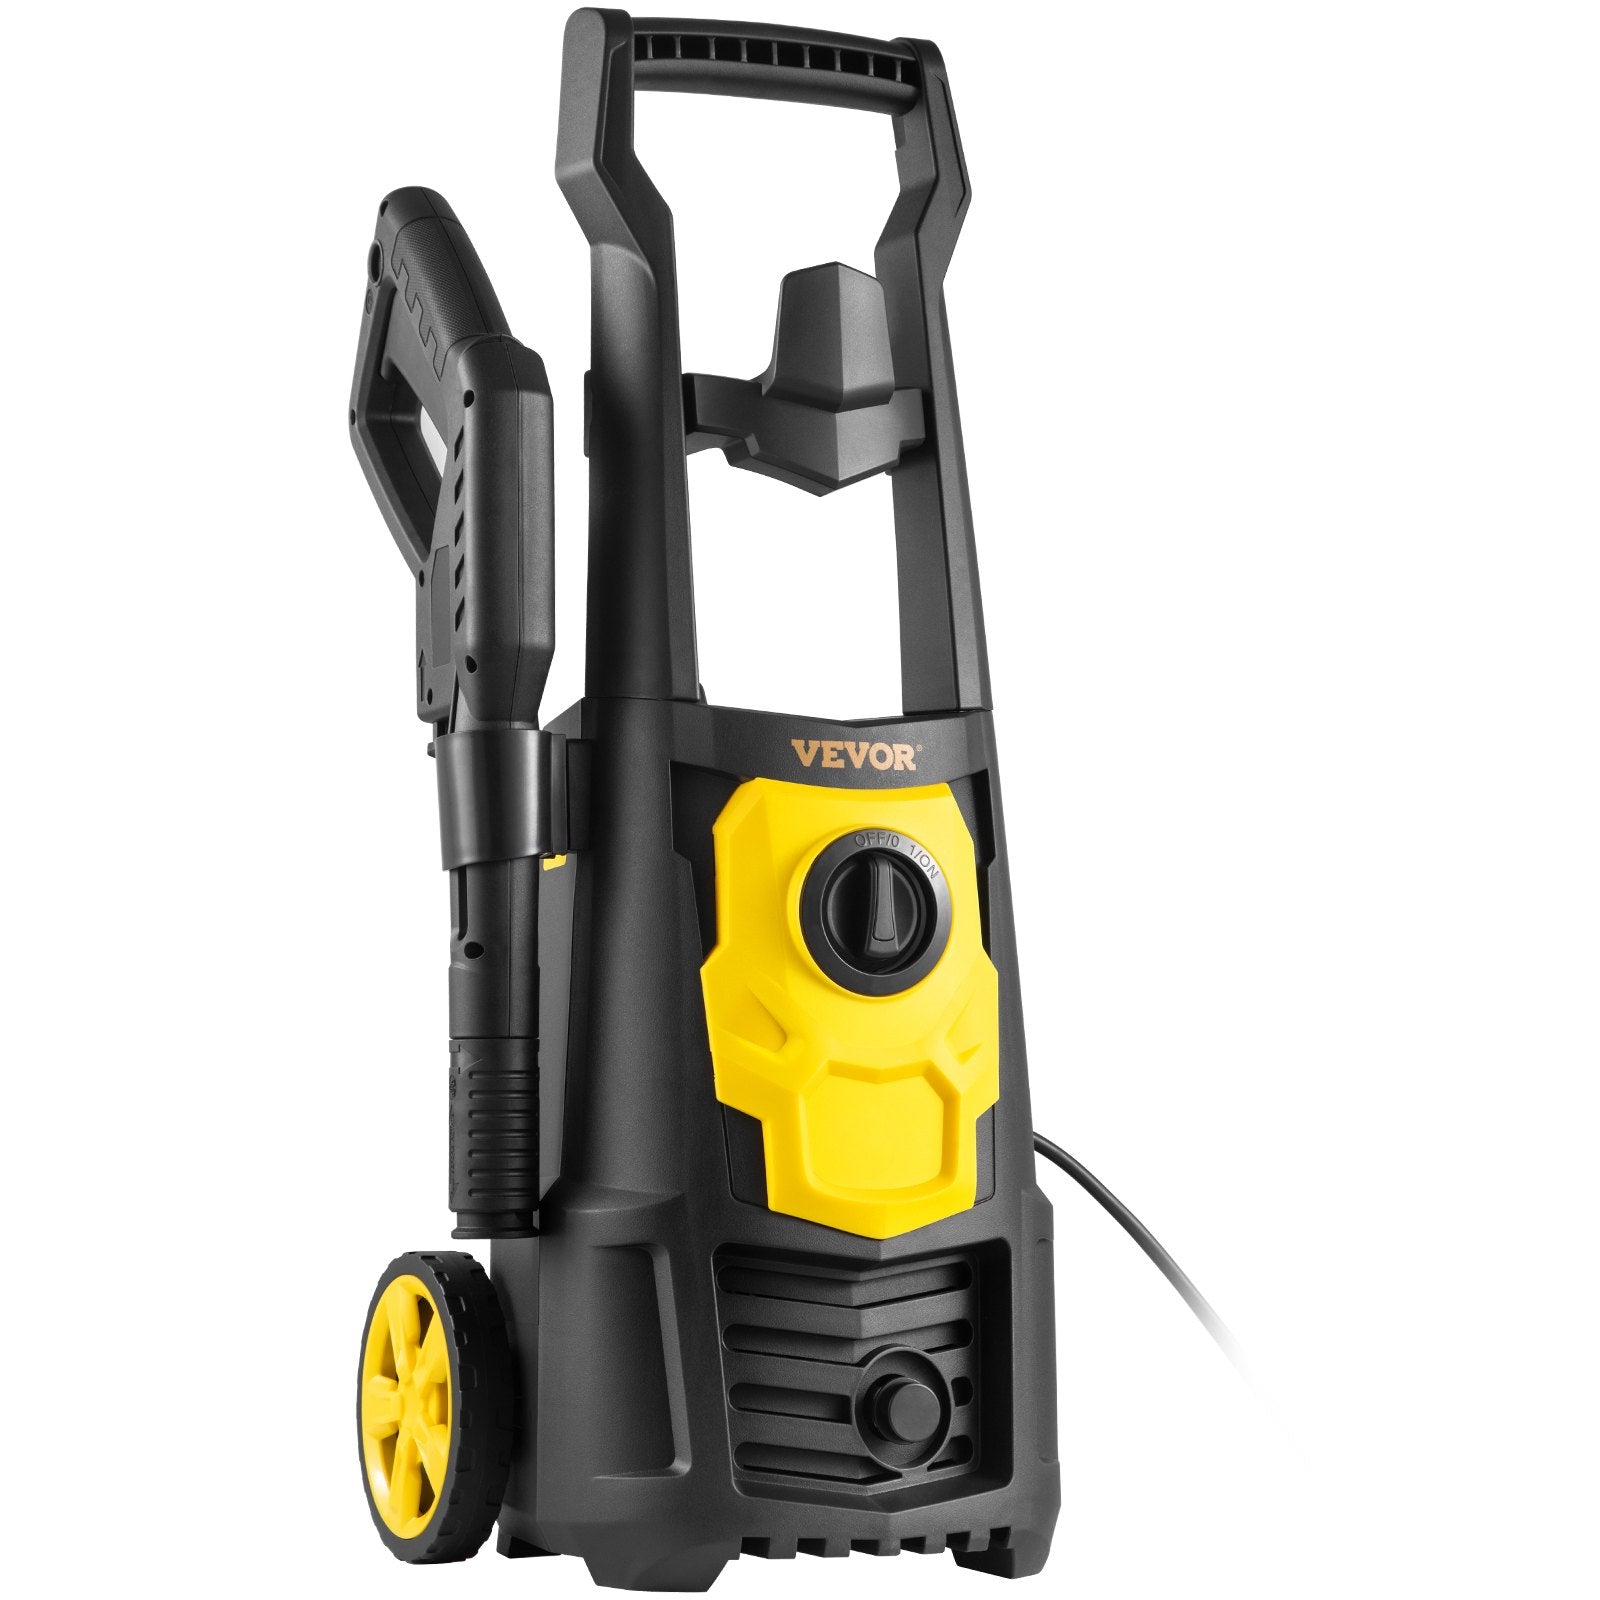 VEVOR Electric Pressure Washer, 2000 PSI, Max. 1.76 GPM Power Washer w/ 30 ft Hose, 5 Quick Connect Nozzles, Foam Cannon, Portable to Clean Patios, Cars, Fences, Driveways, ETL Listed-9